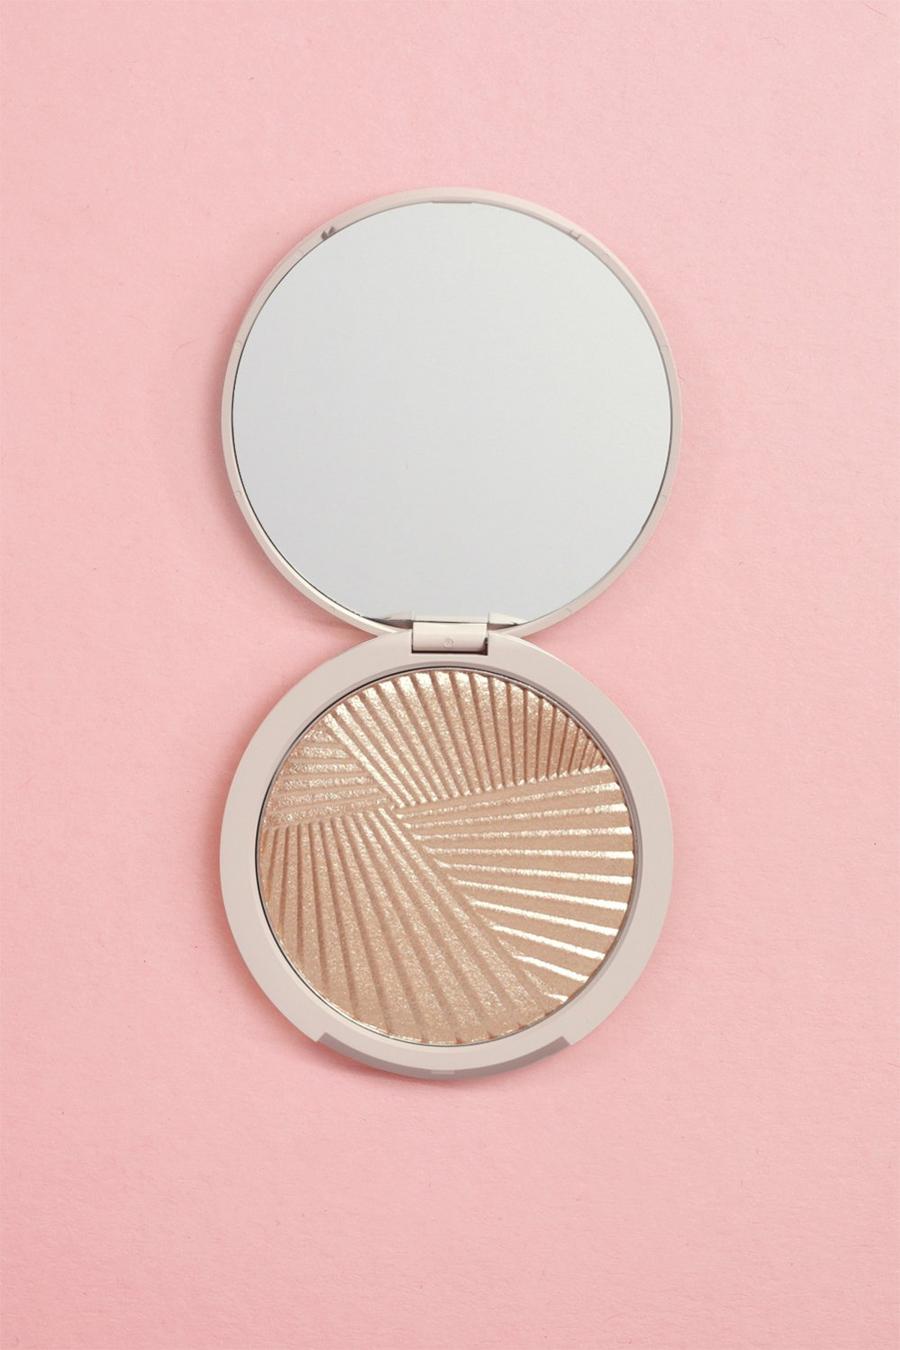 Boohoo Beauty Face & Body Highlighter Puder mit Spiegel, Champagne beige